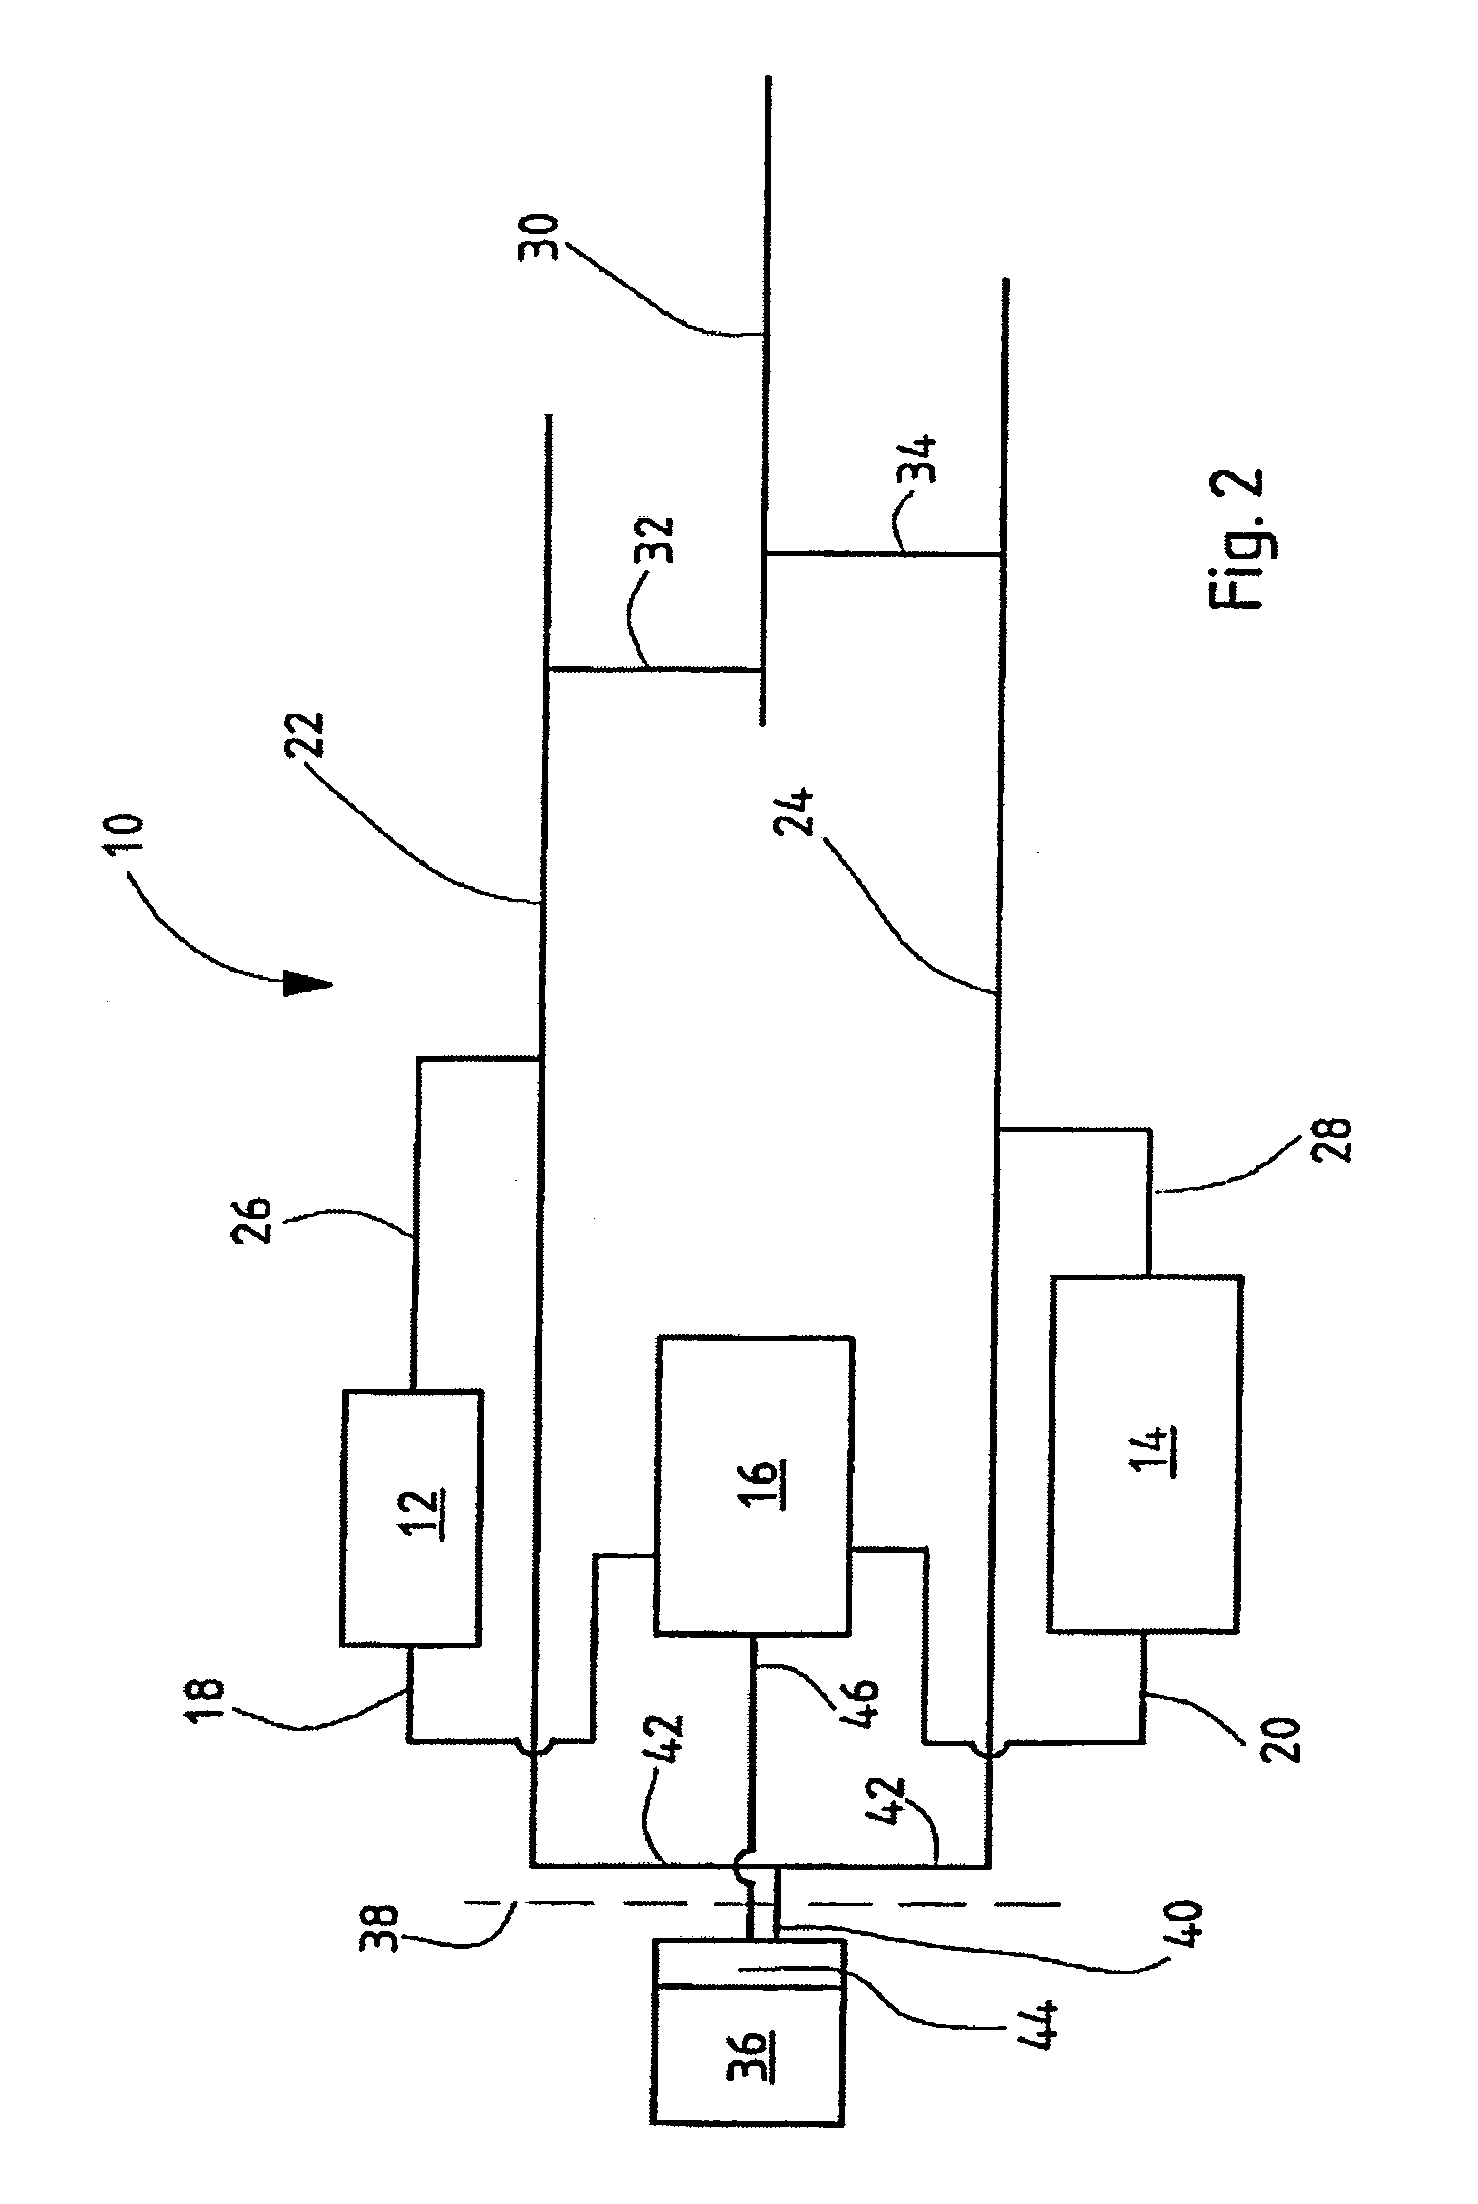 Drive system for a vehicle